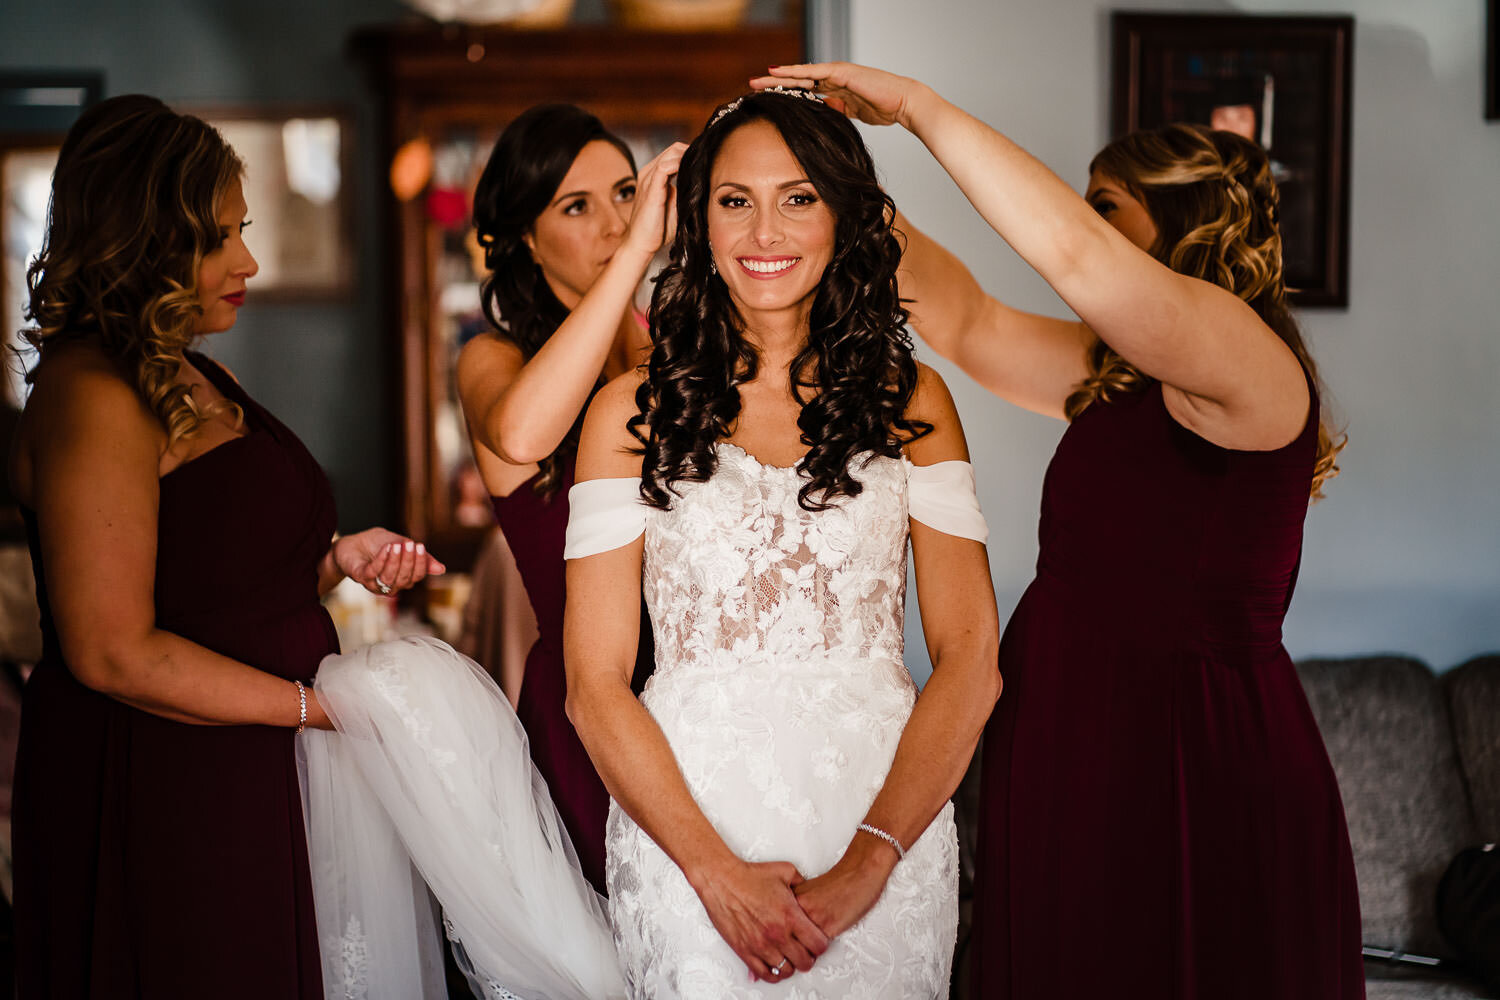 Bridesmaids help the bride with her veil during preparations